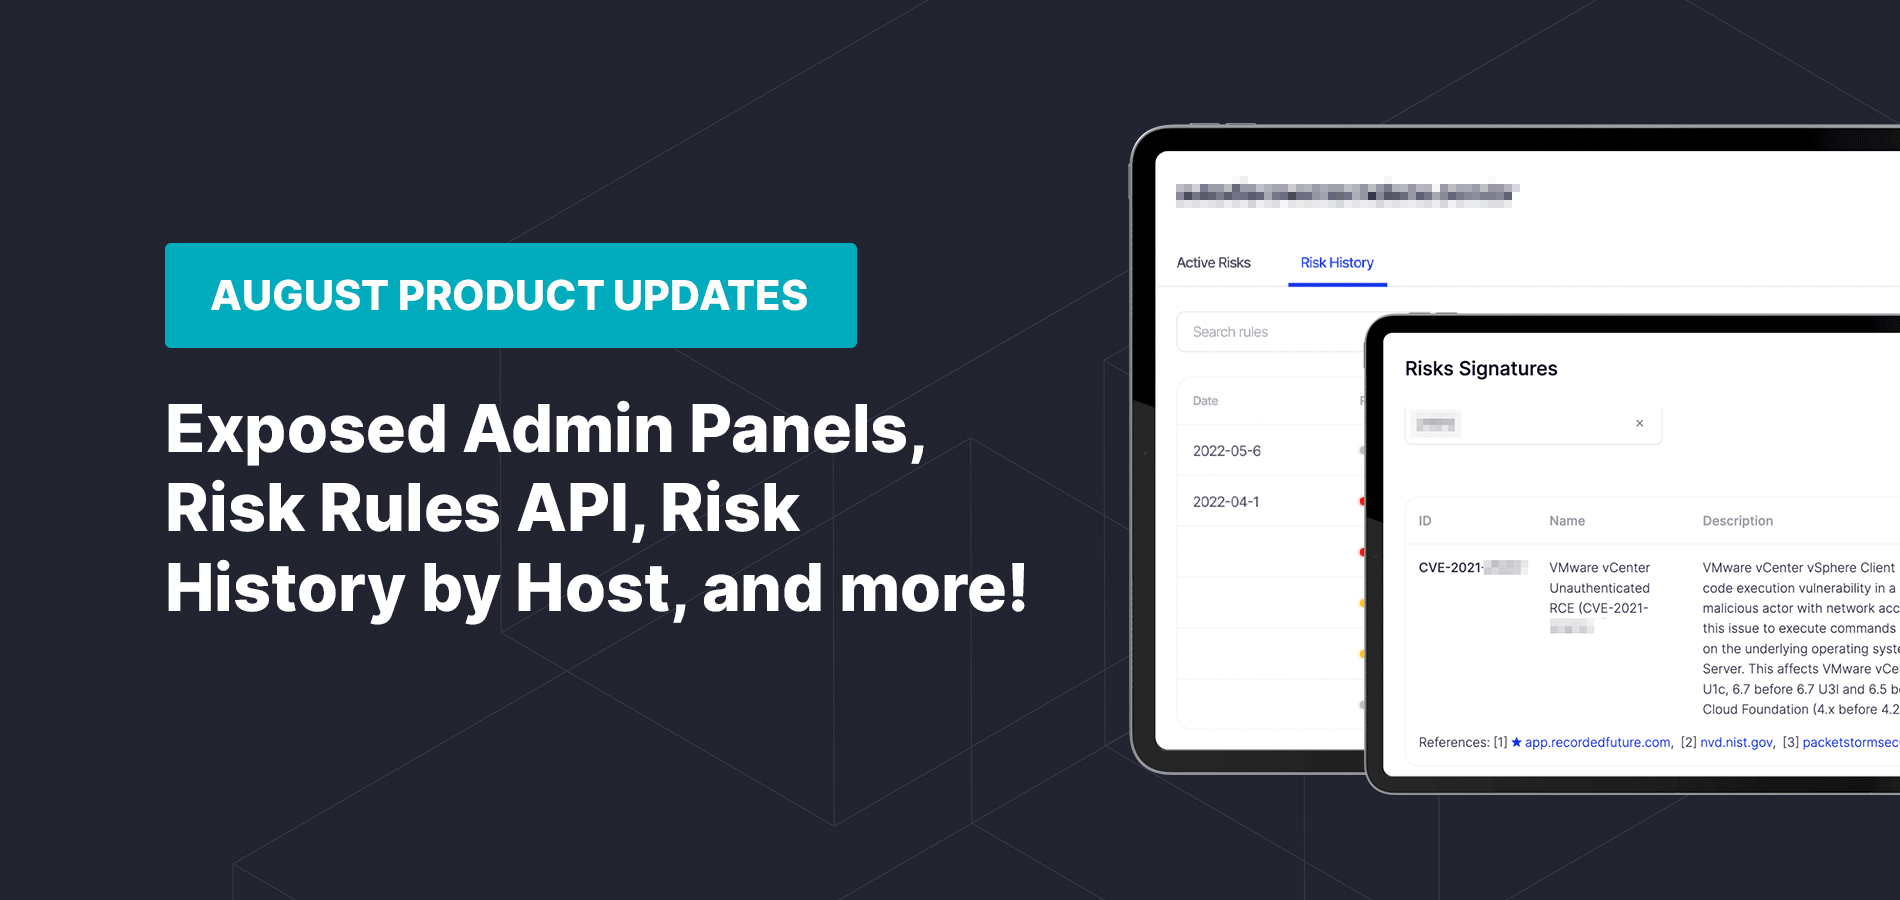 August Product Update: Exposed Admin Panels, Risk Rules API, Risk History by Host, and more!.